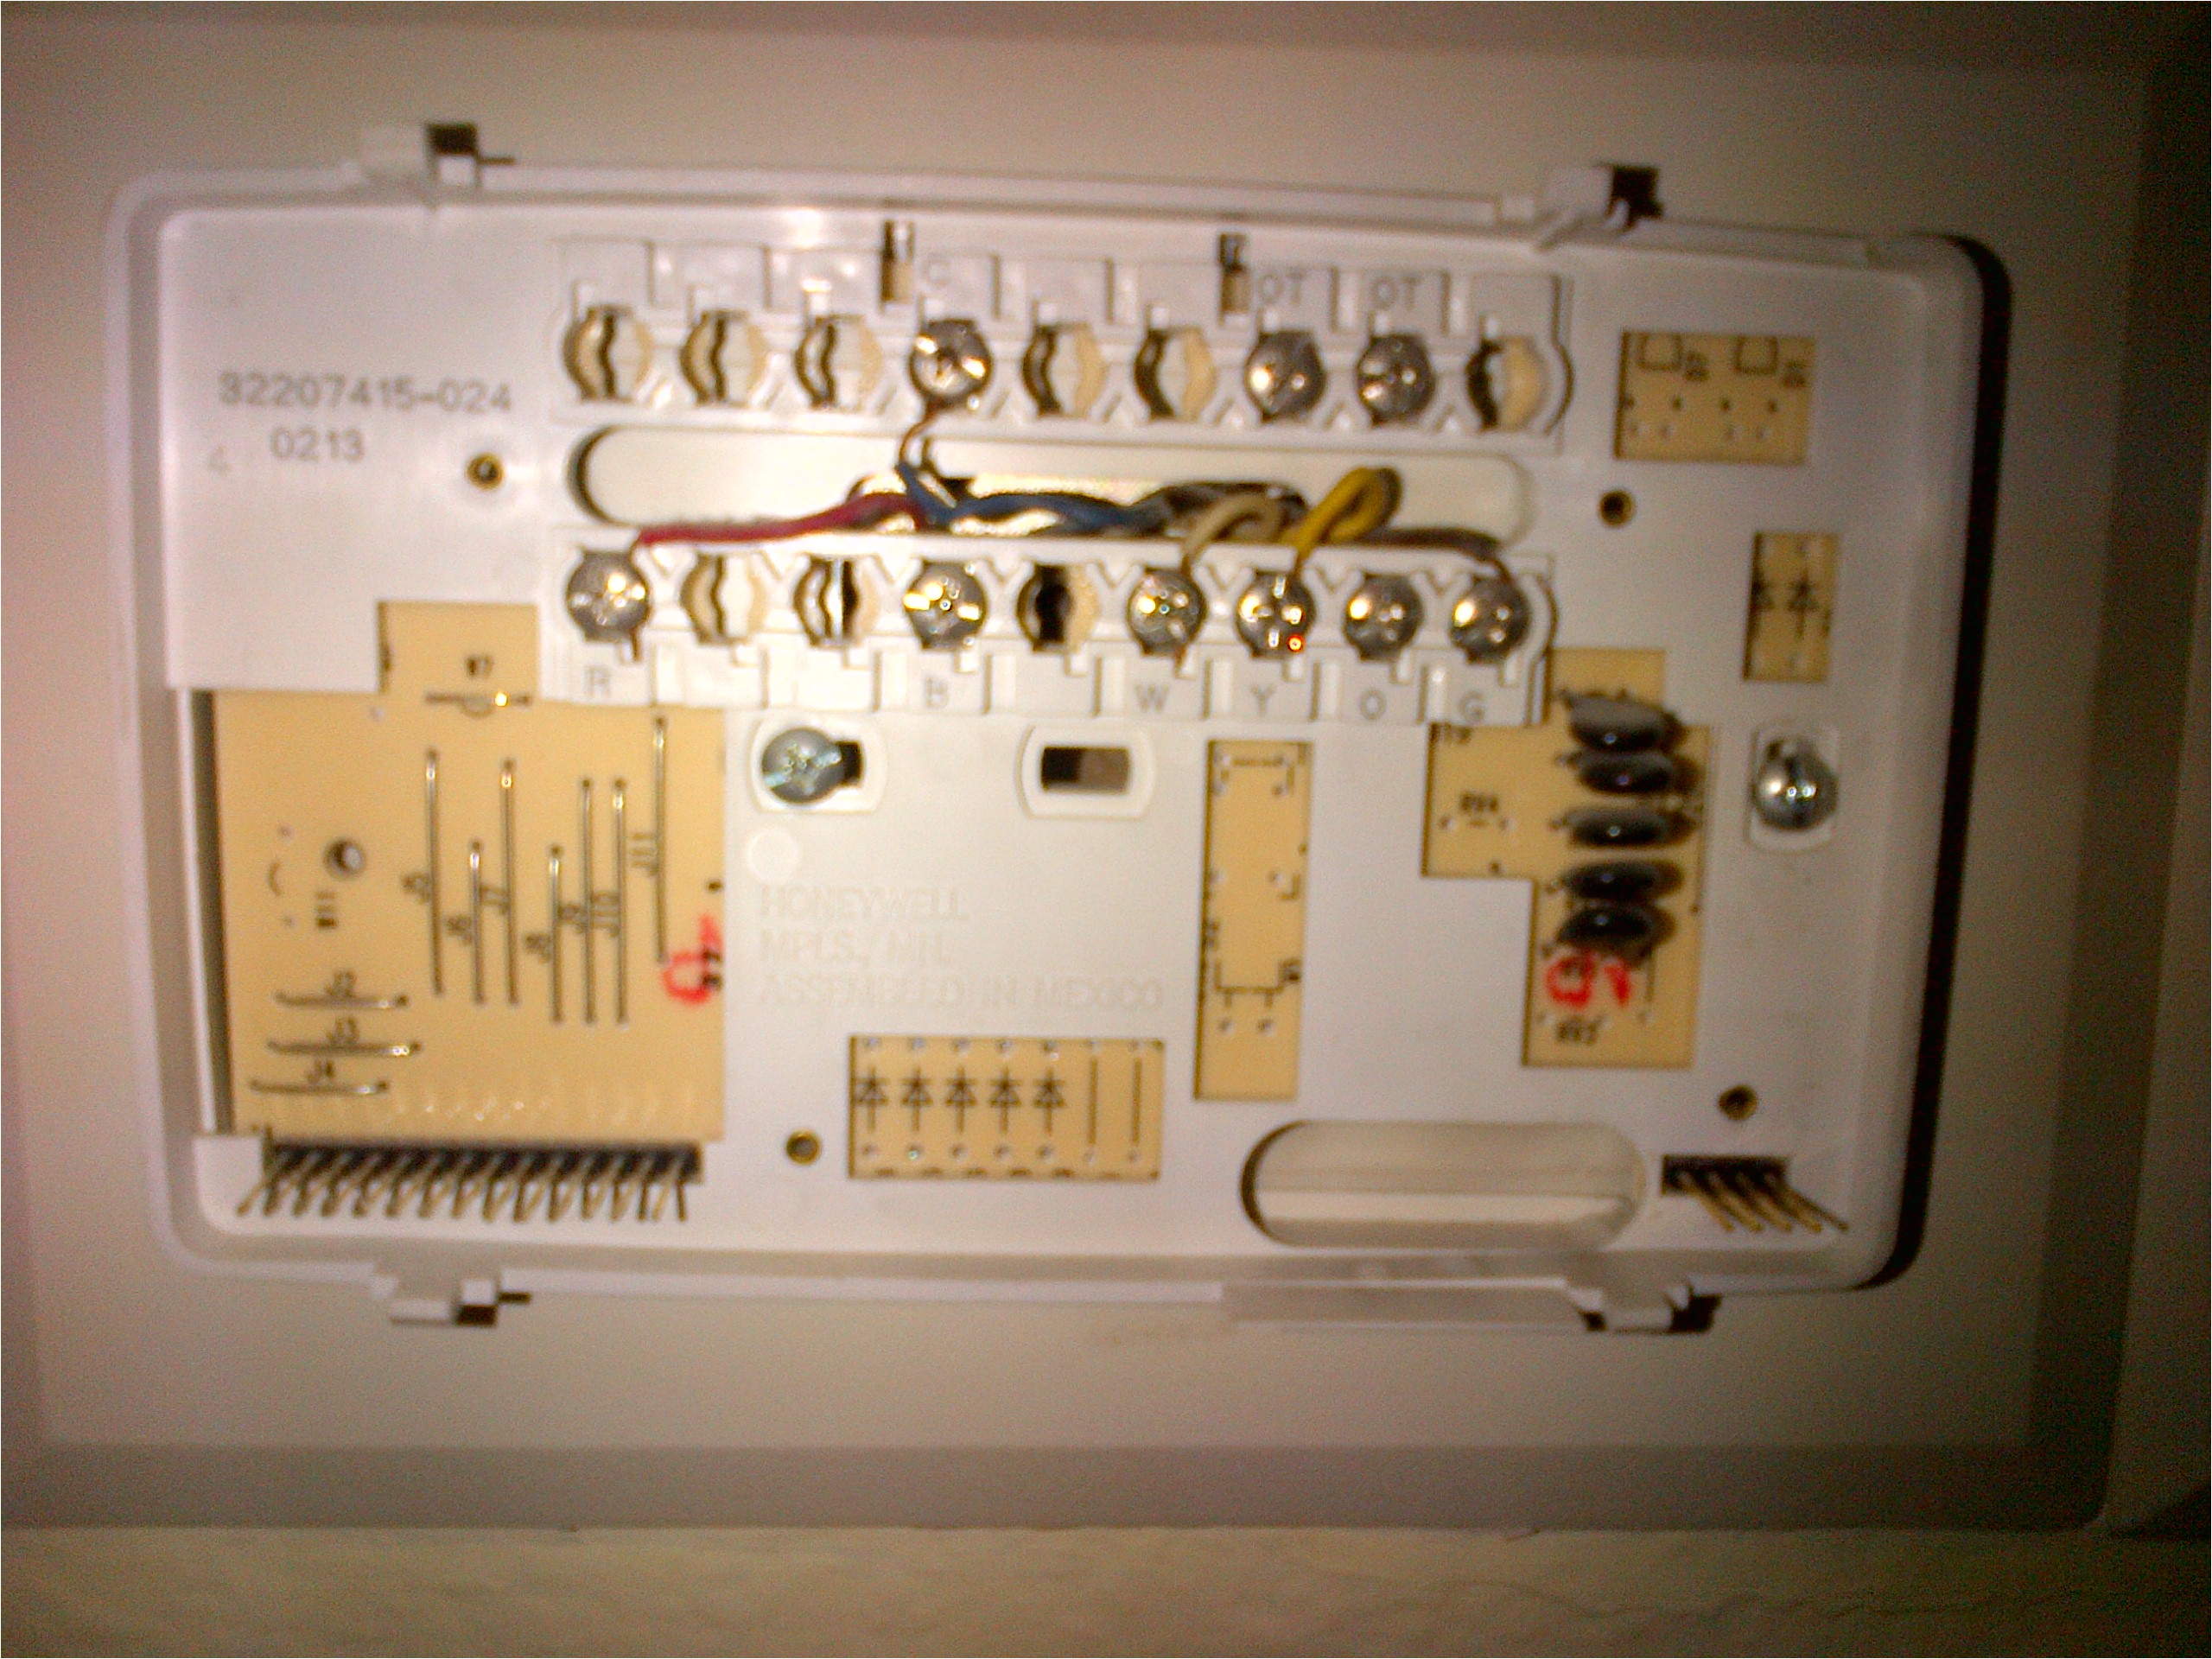 i have rudd silhouette 2 gas furnace with electric ignition chronotherm iii wiring diagram honeywell thermostat wiring